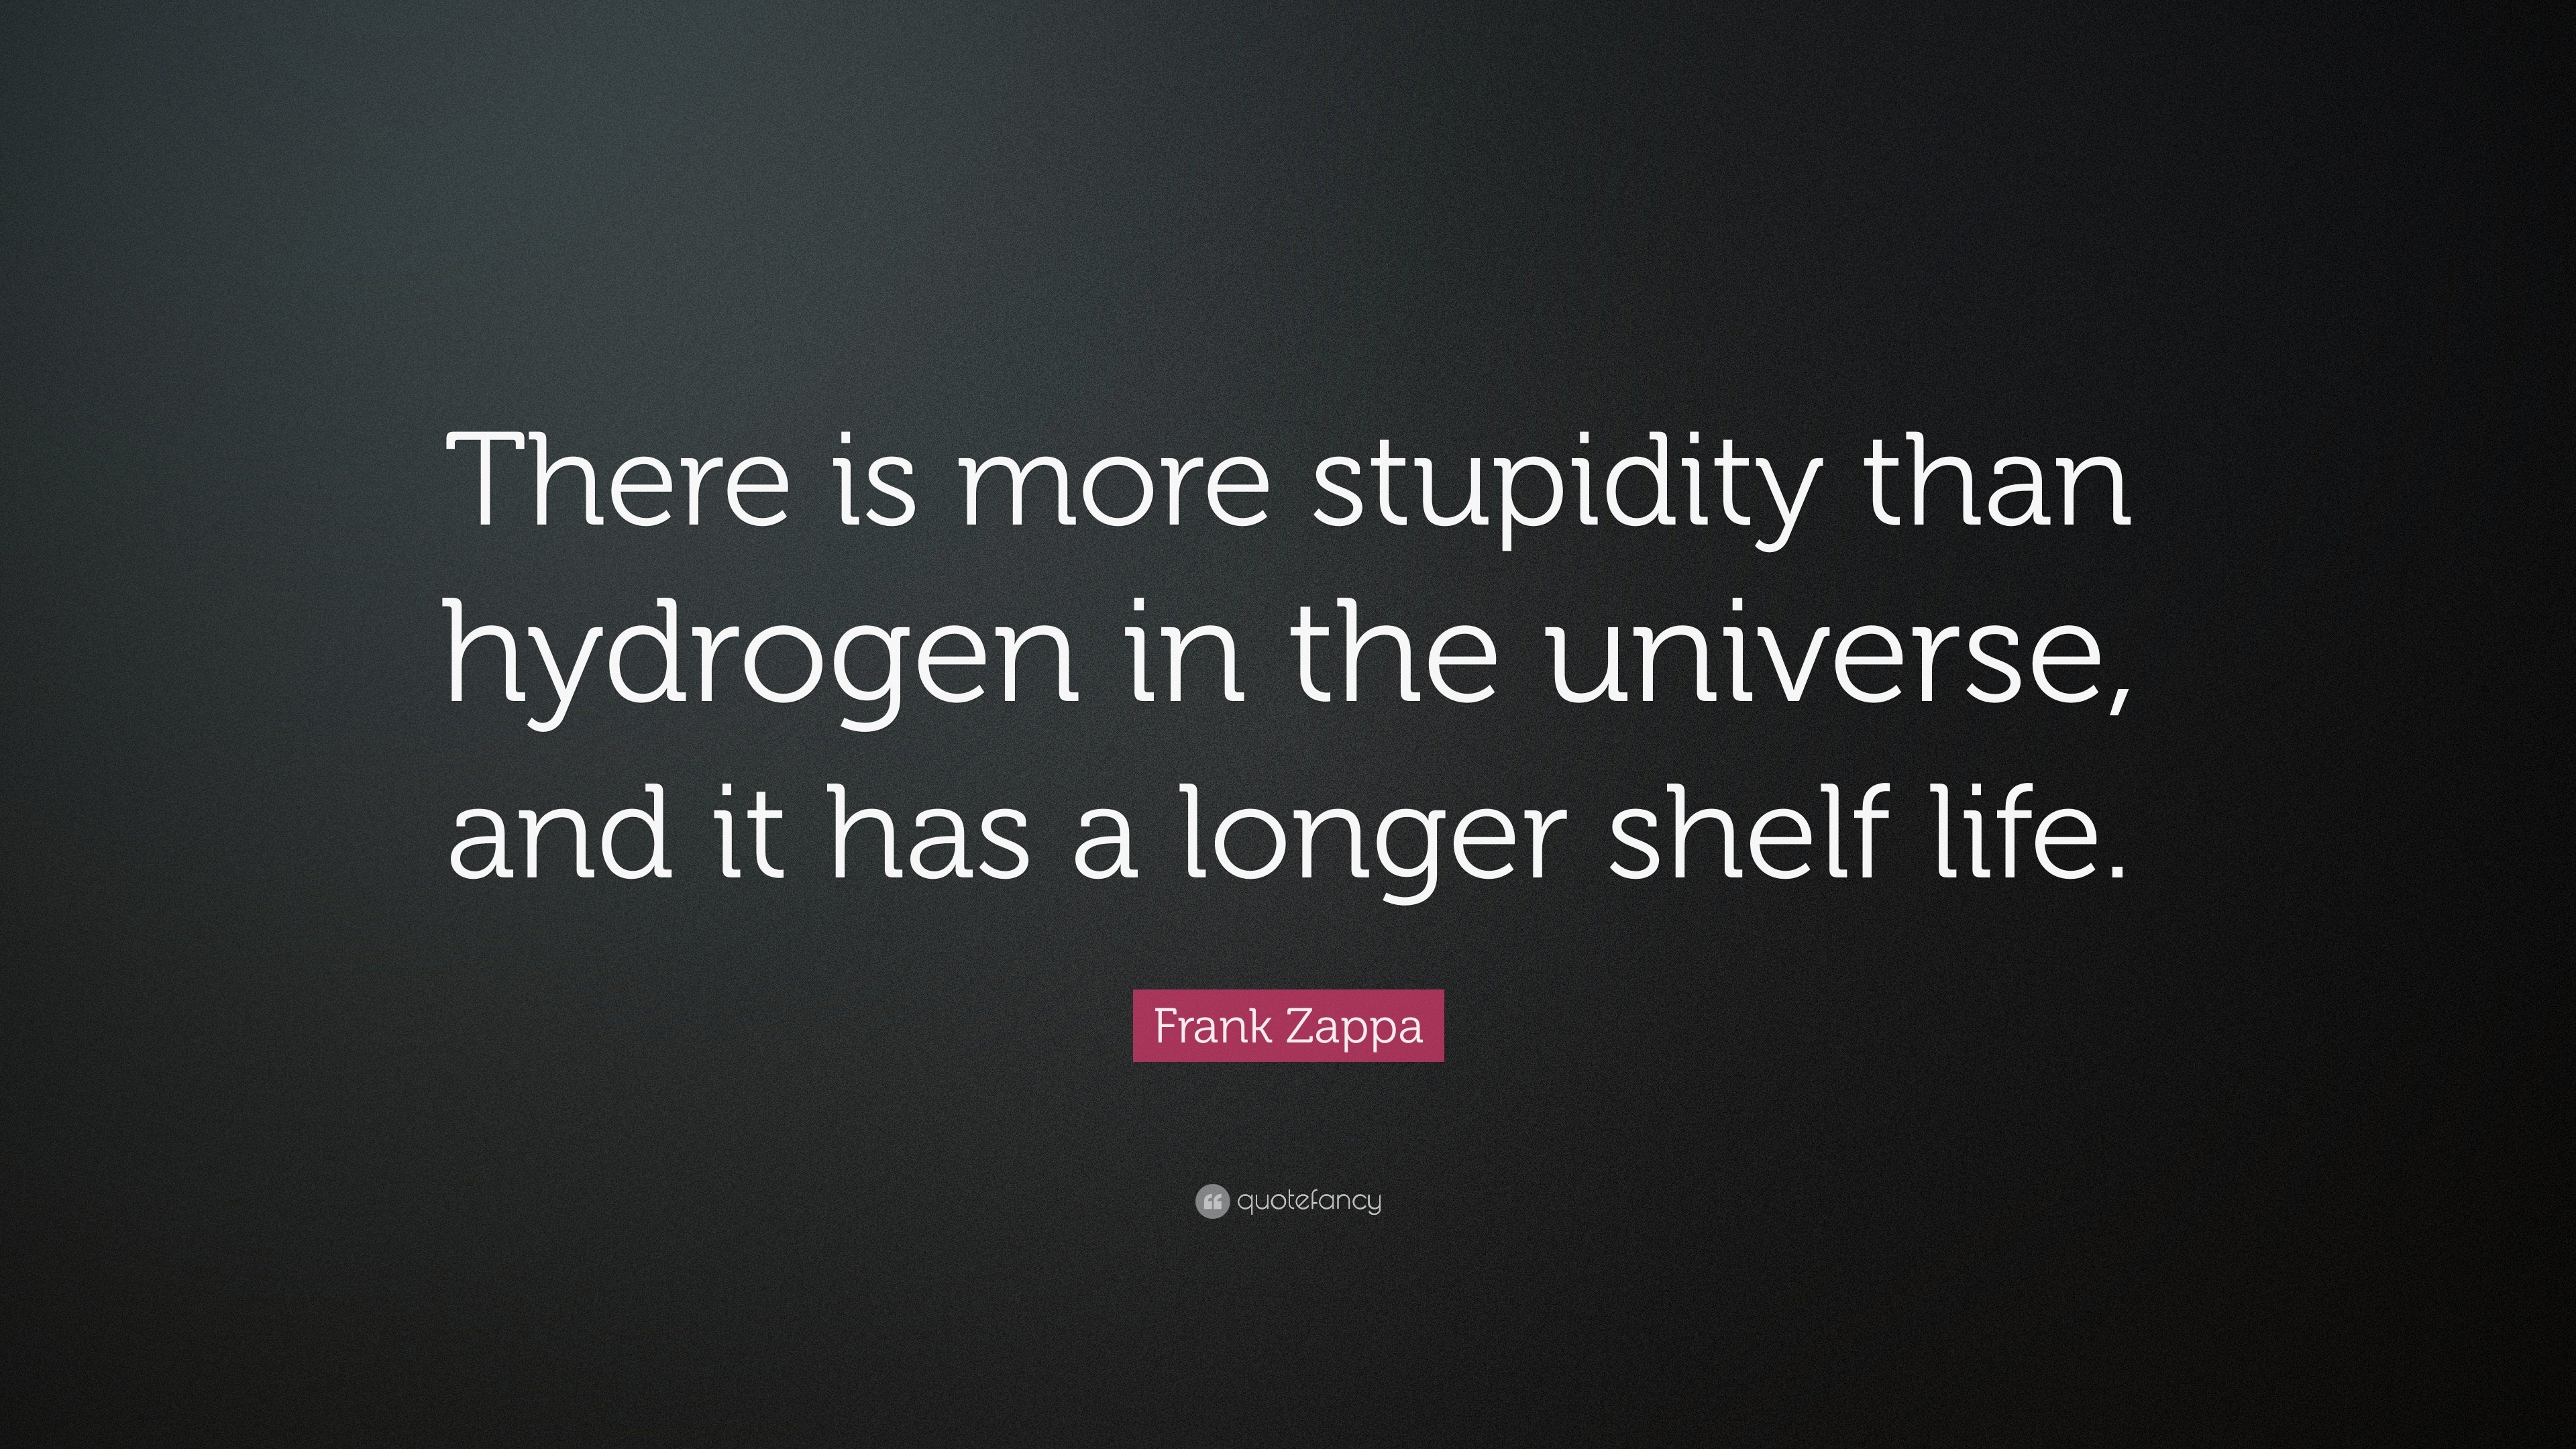 17094-Frank-Zappa-Quote-There-is-more-stupidity-than-hydrogen-in-the.jpg